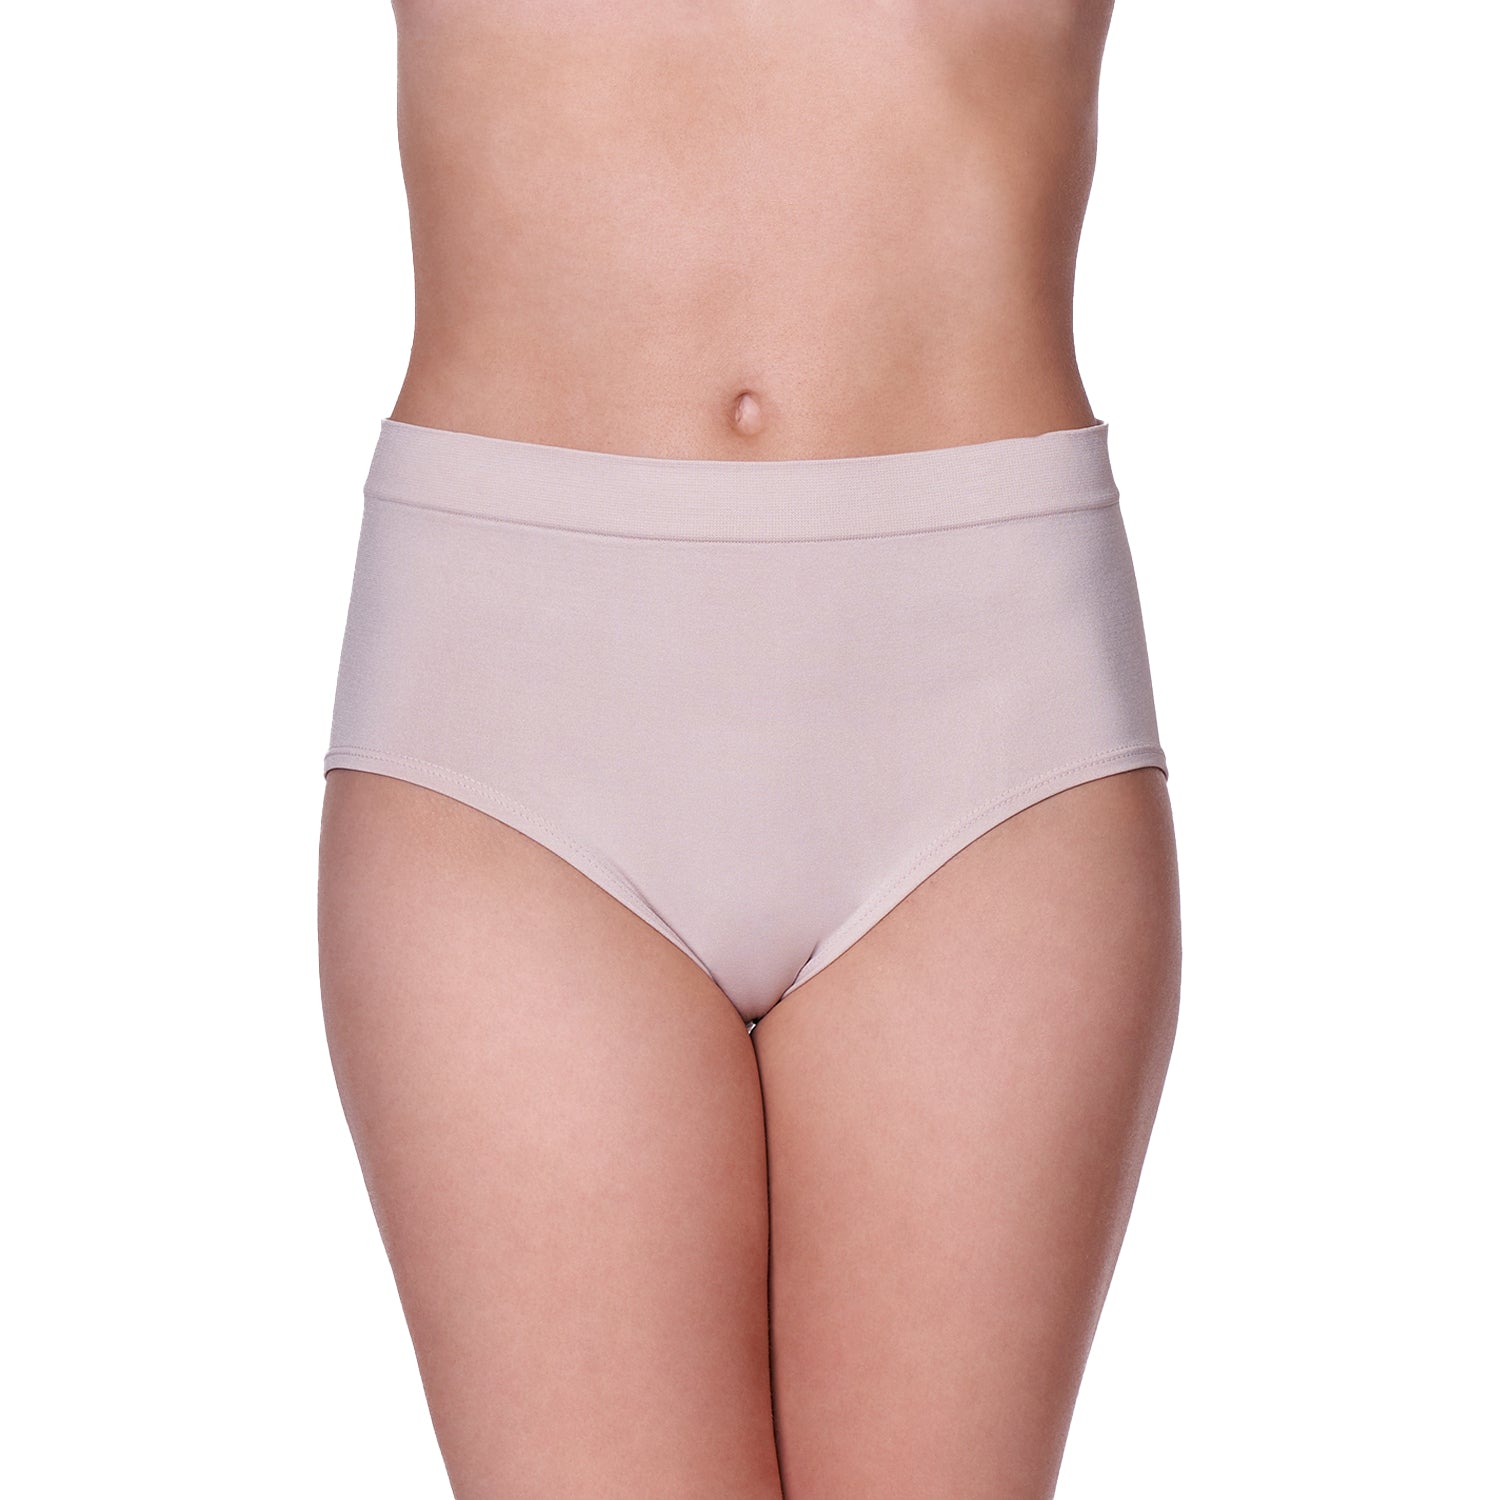  Kalsone womens seamless cotton thong, low rise hipster